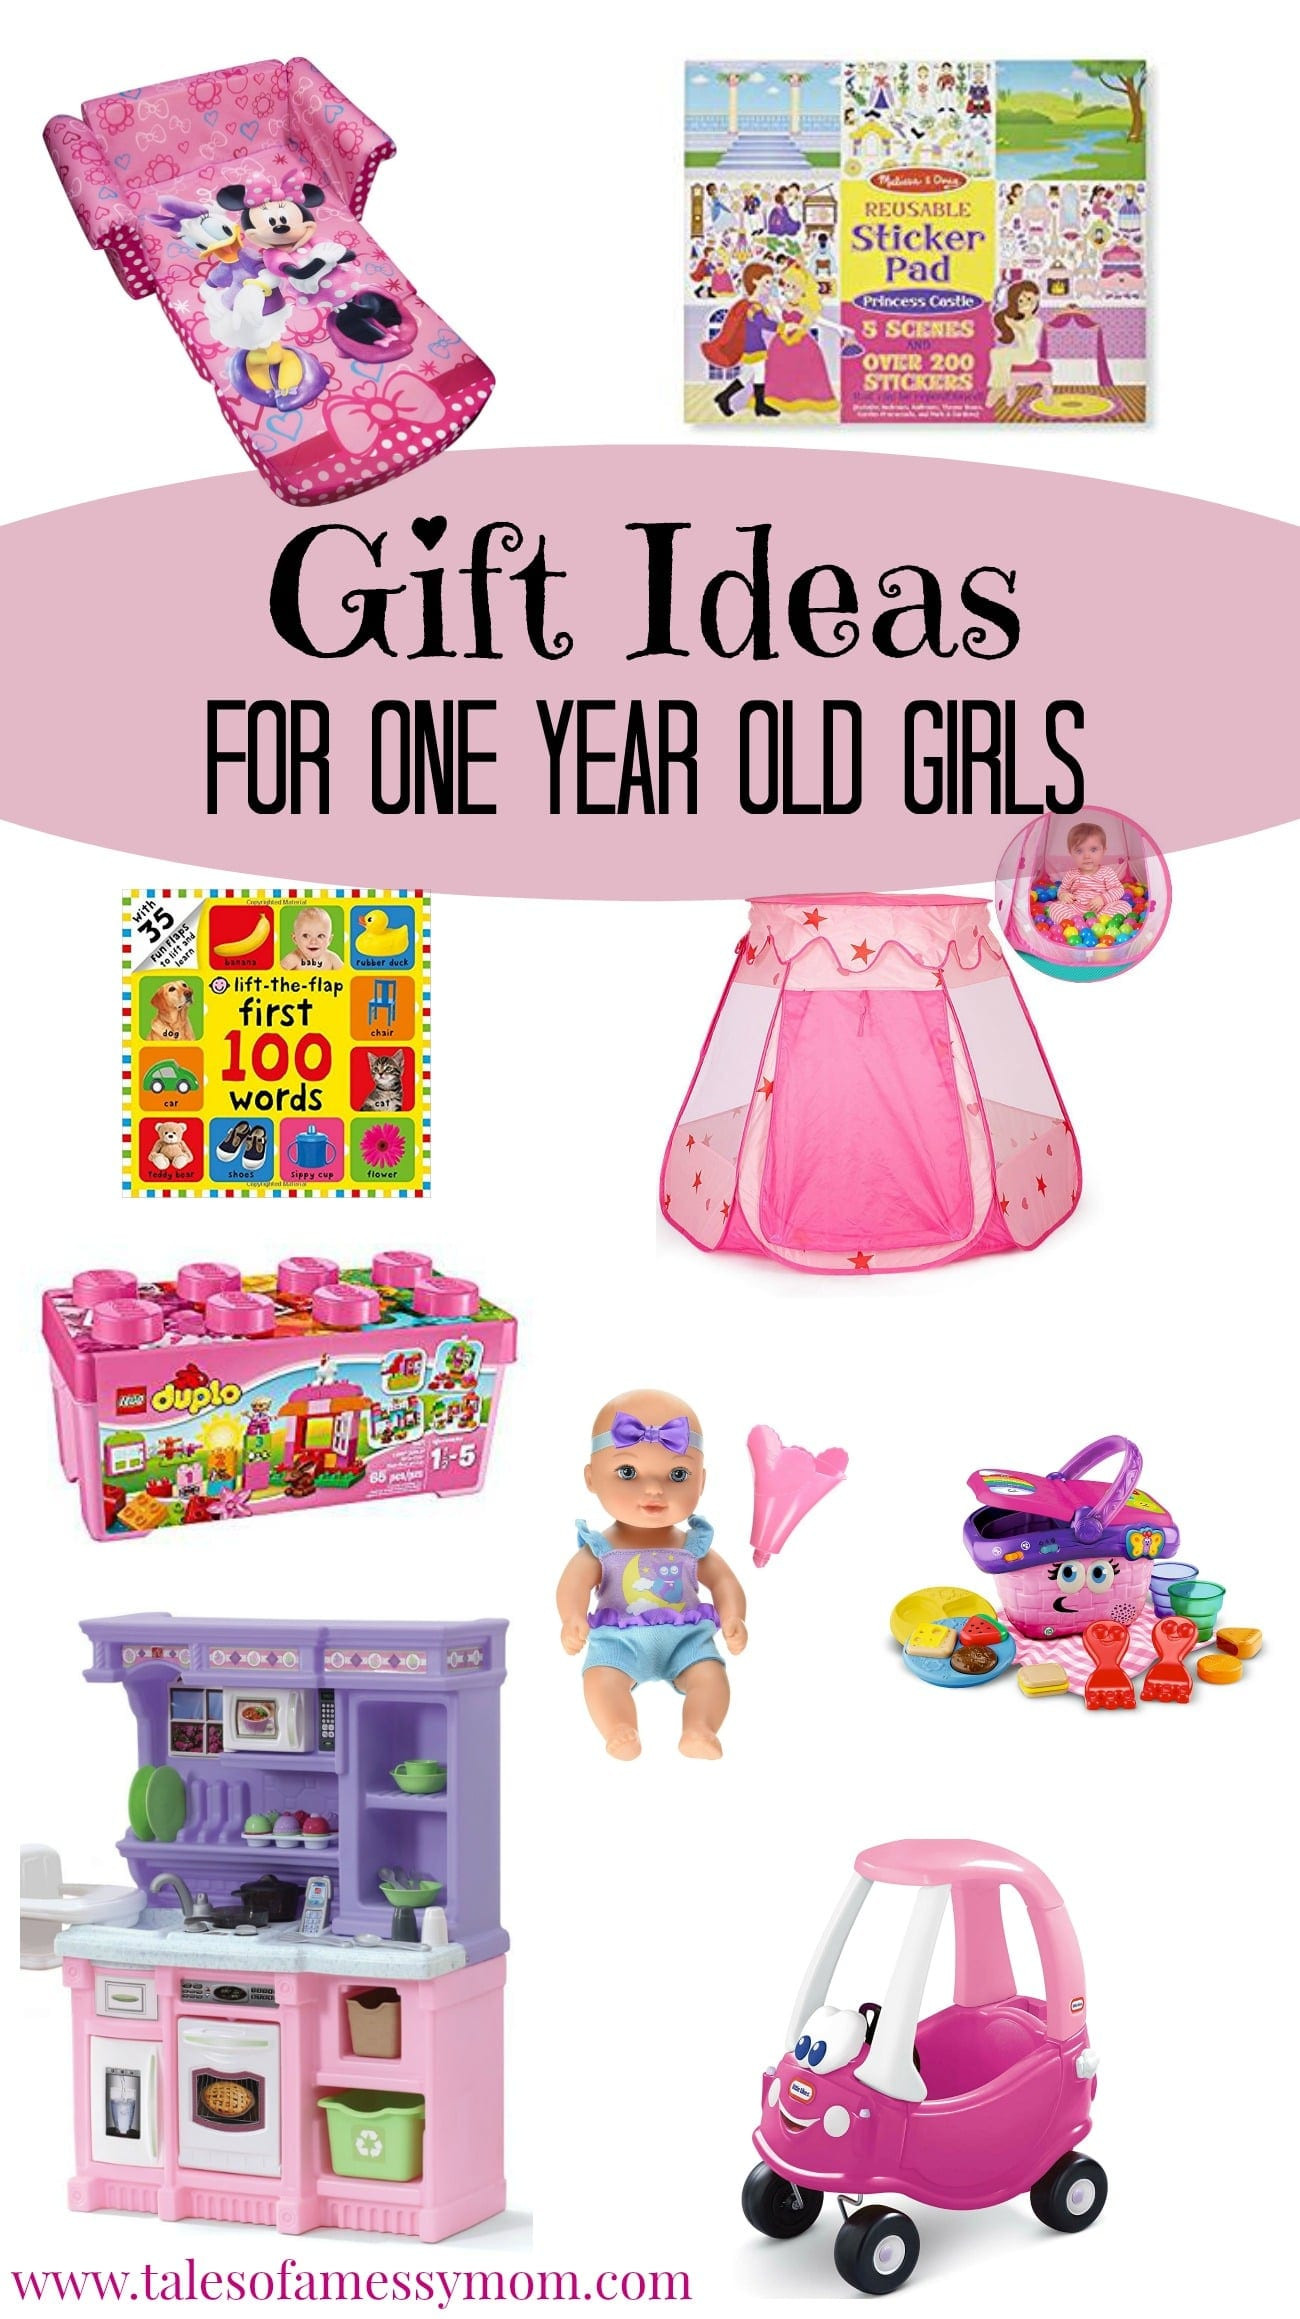 Birthday Gifts For 11 Year Old Girls
 Gift Ideas for e Year Old Girls Tales of a Messy Mom